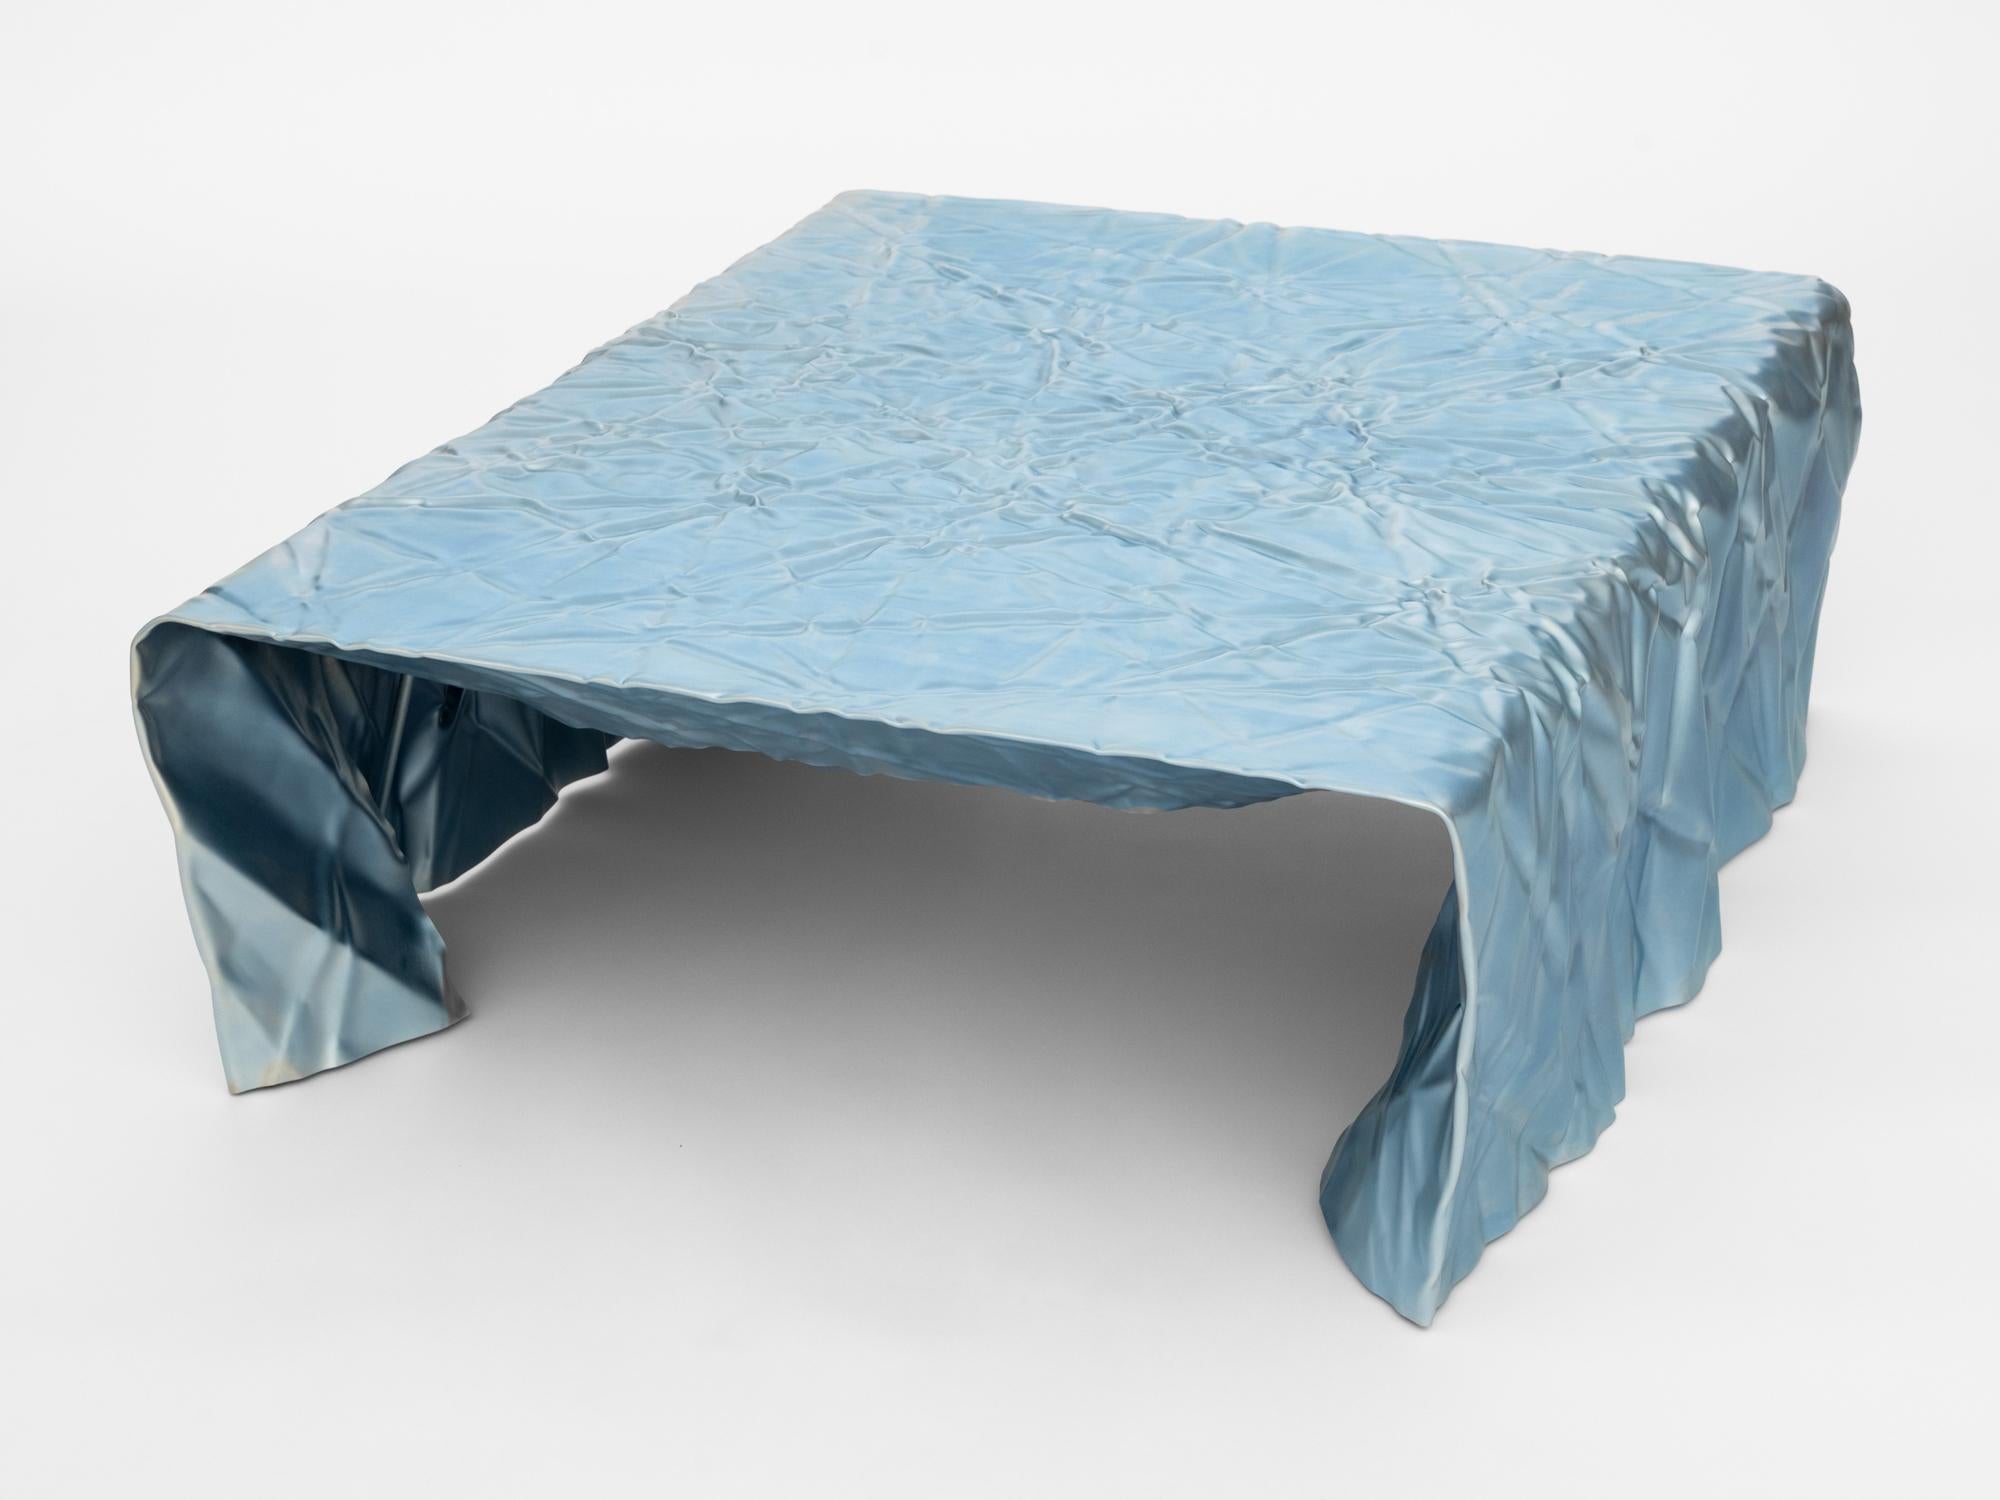 Wrinkled steel coffee table by Omaha-based designer Christopher Prinz, who achieves this unusual texture by repeatedly creasing a thin sheet of steel, resulting in a strong, rigid, and unique form. Hidden leveling feet protect surfaces and ensure